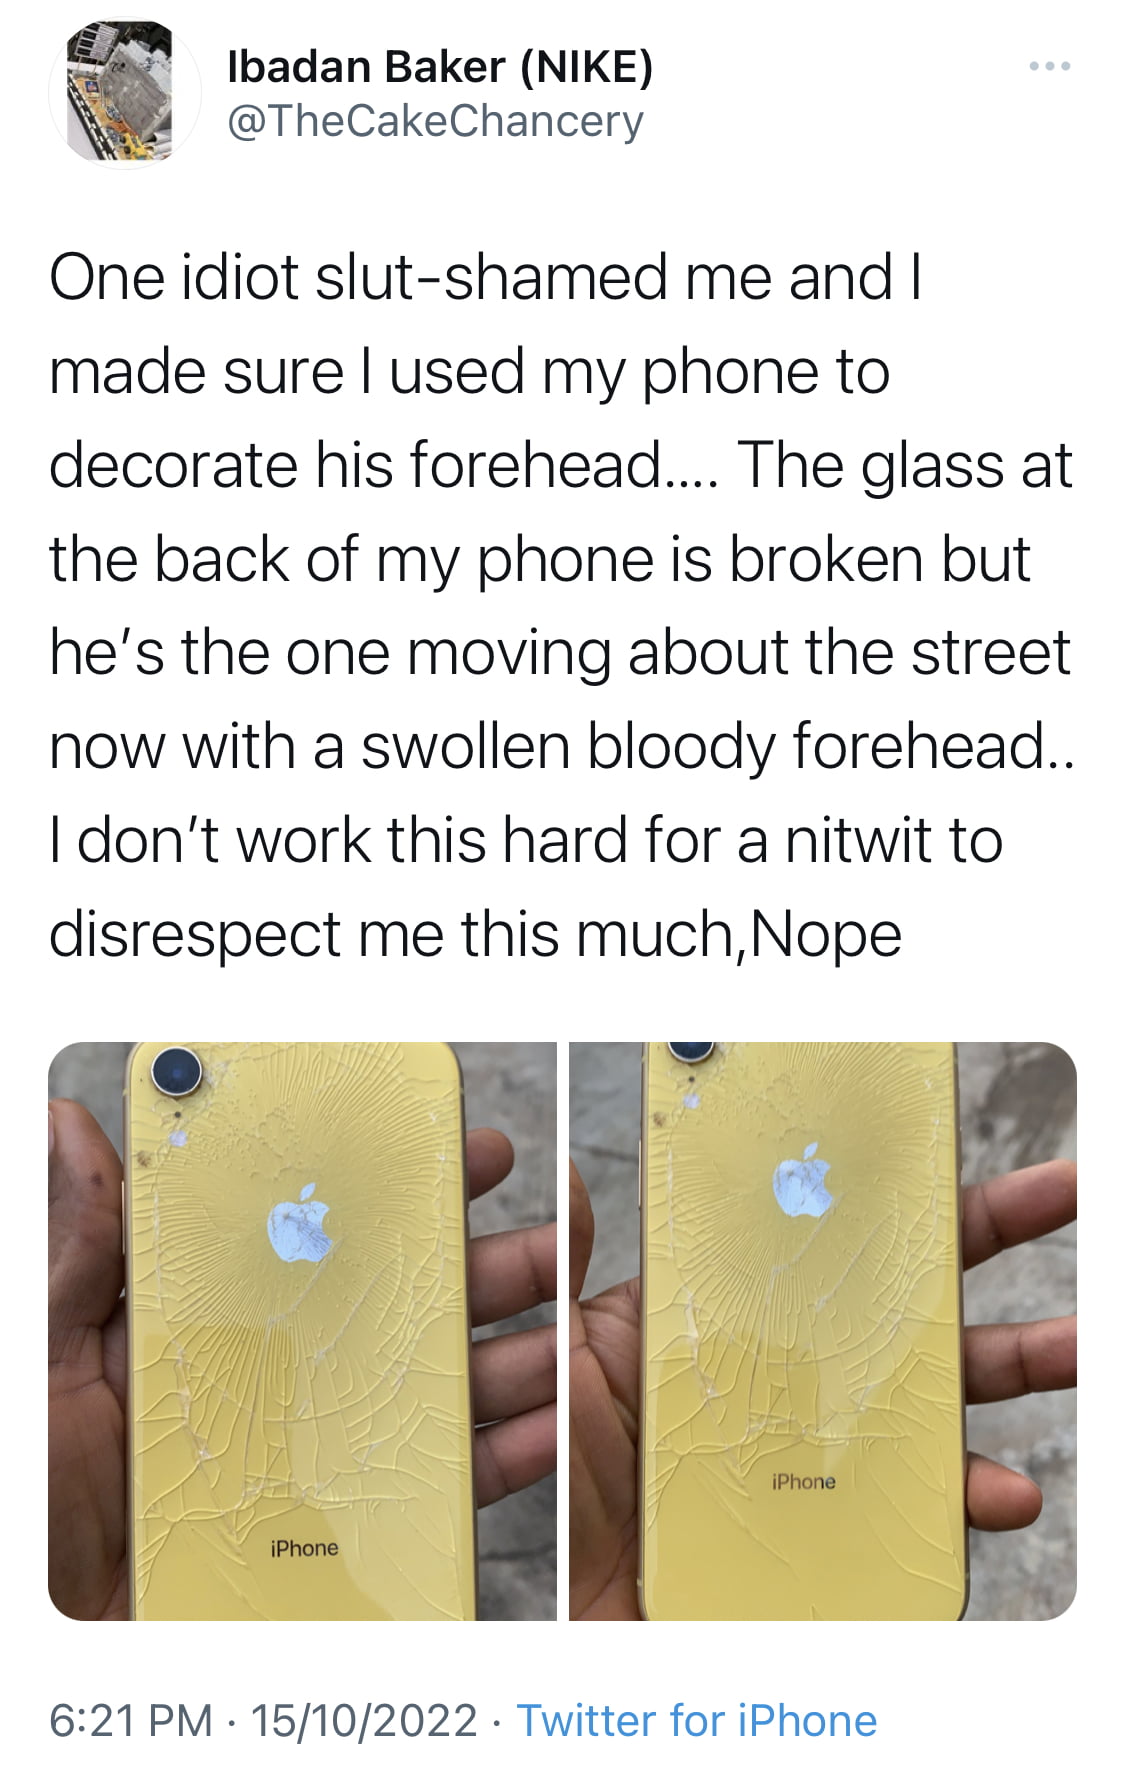 Lady jubilates after shattering her $300 iphone on man’s head for slut shaming her [photos]